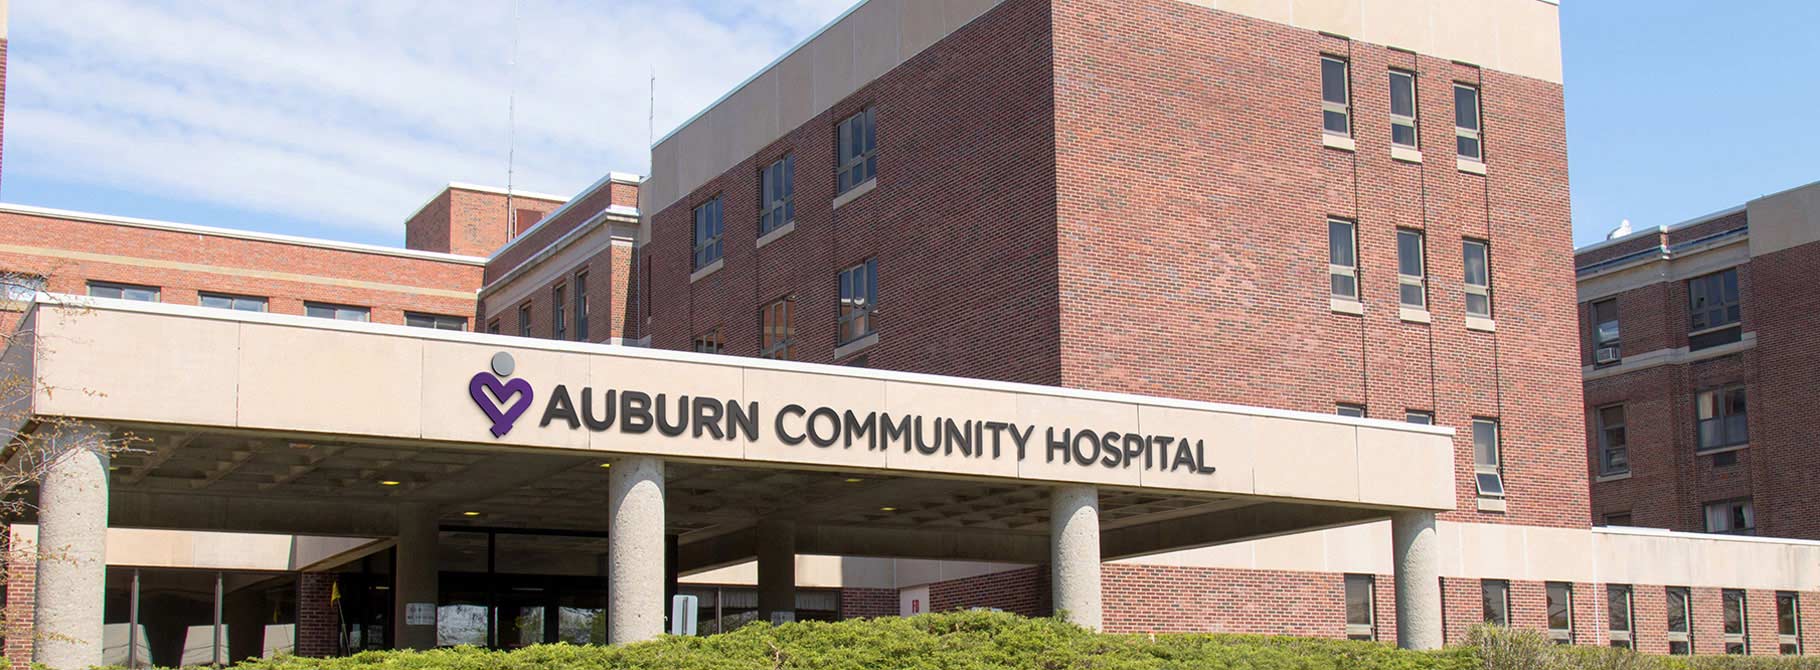 'Essential care': Auburn hospital gets $21M from NY to fund two major projects